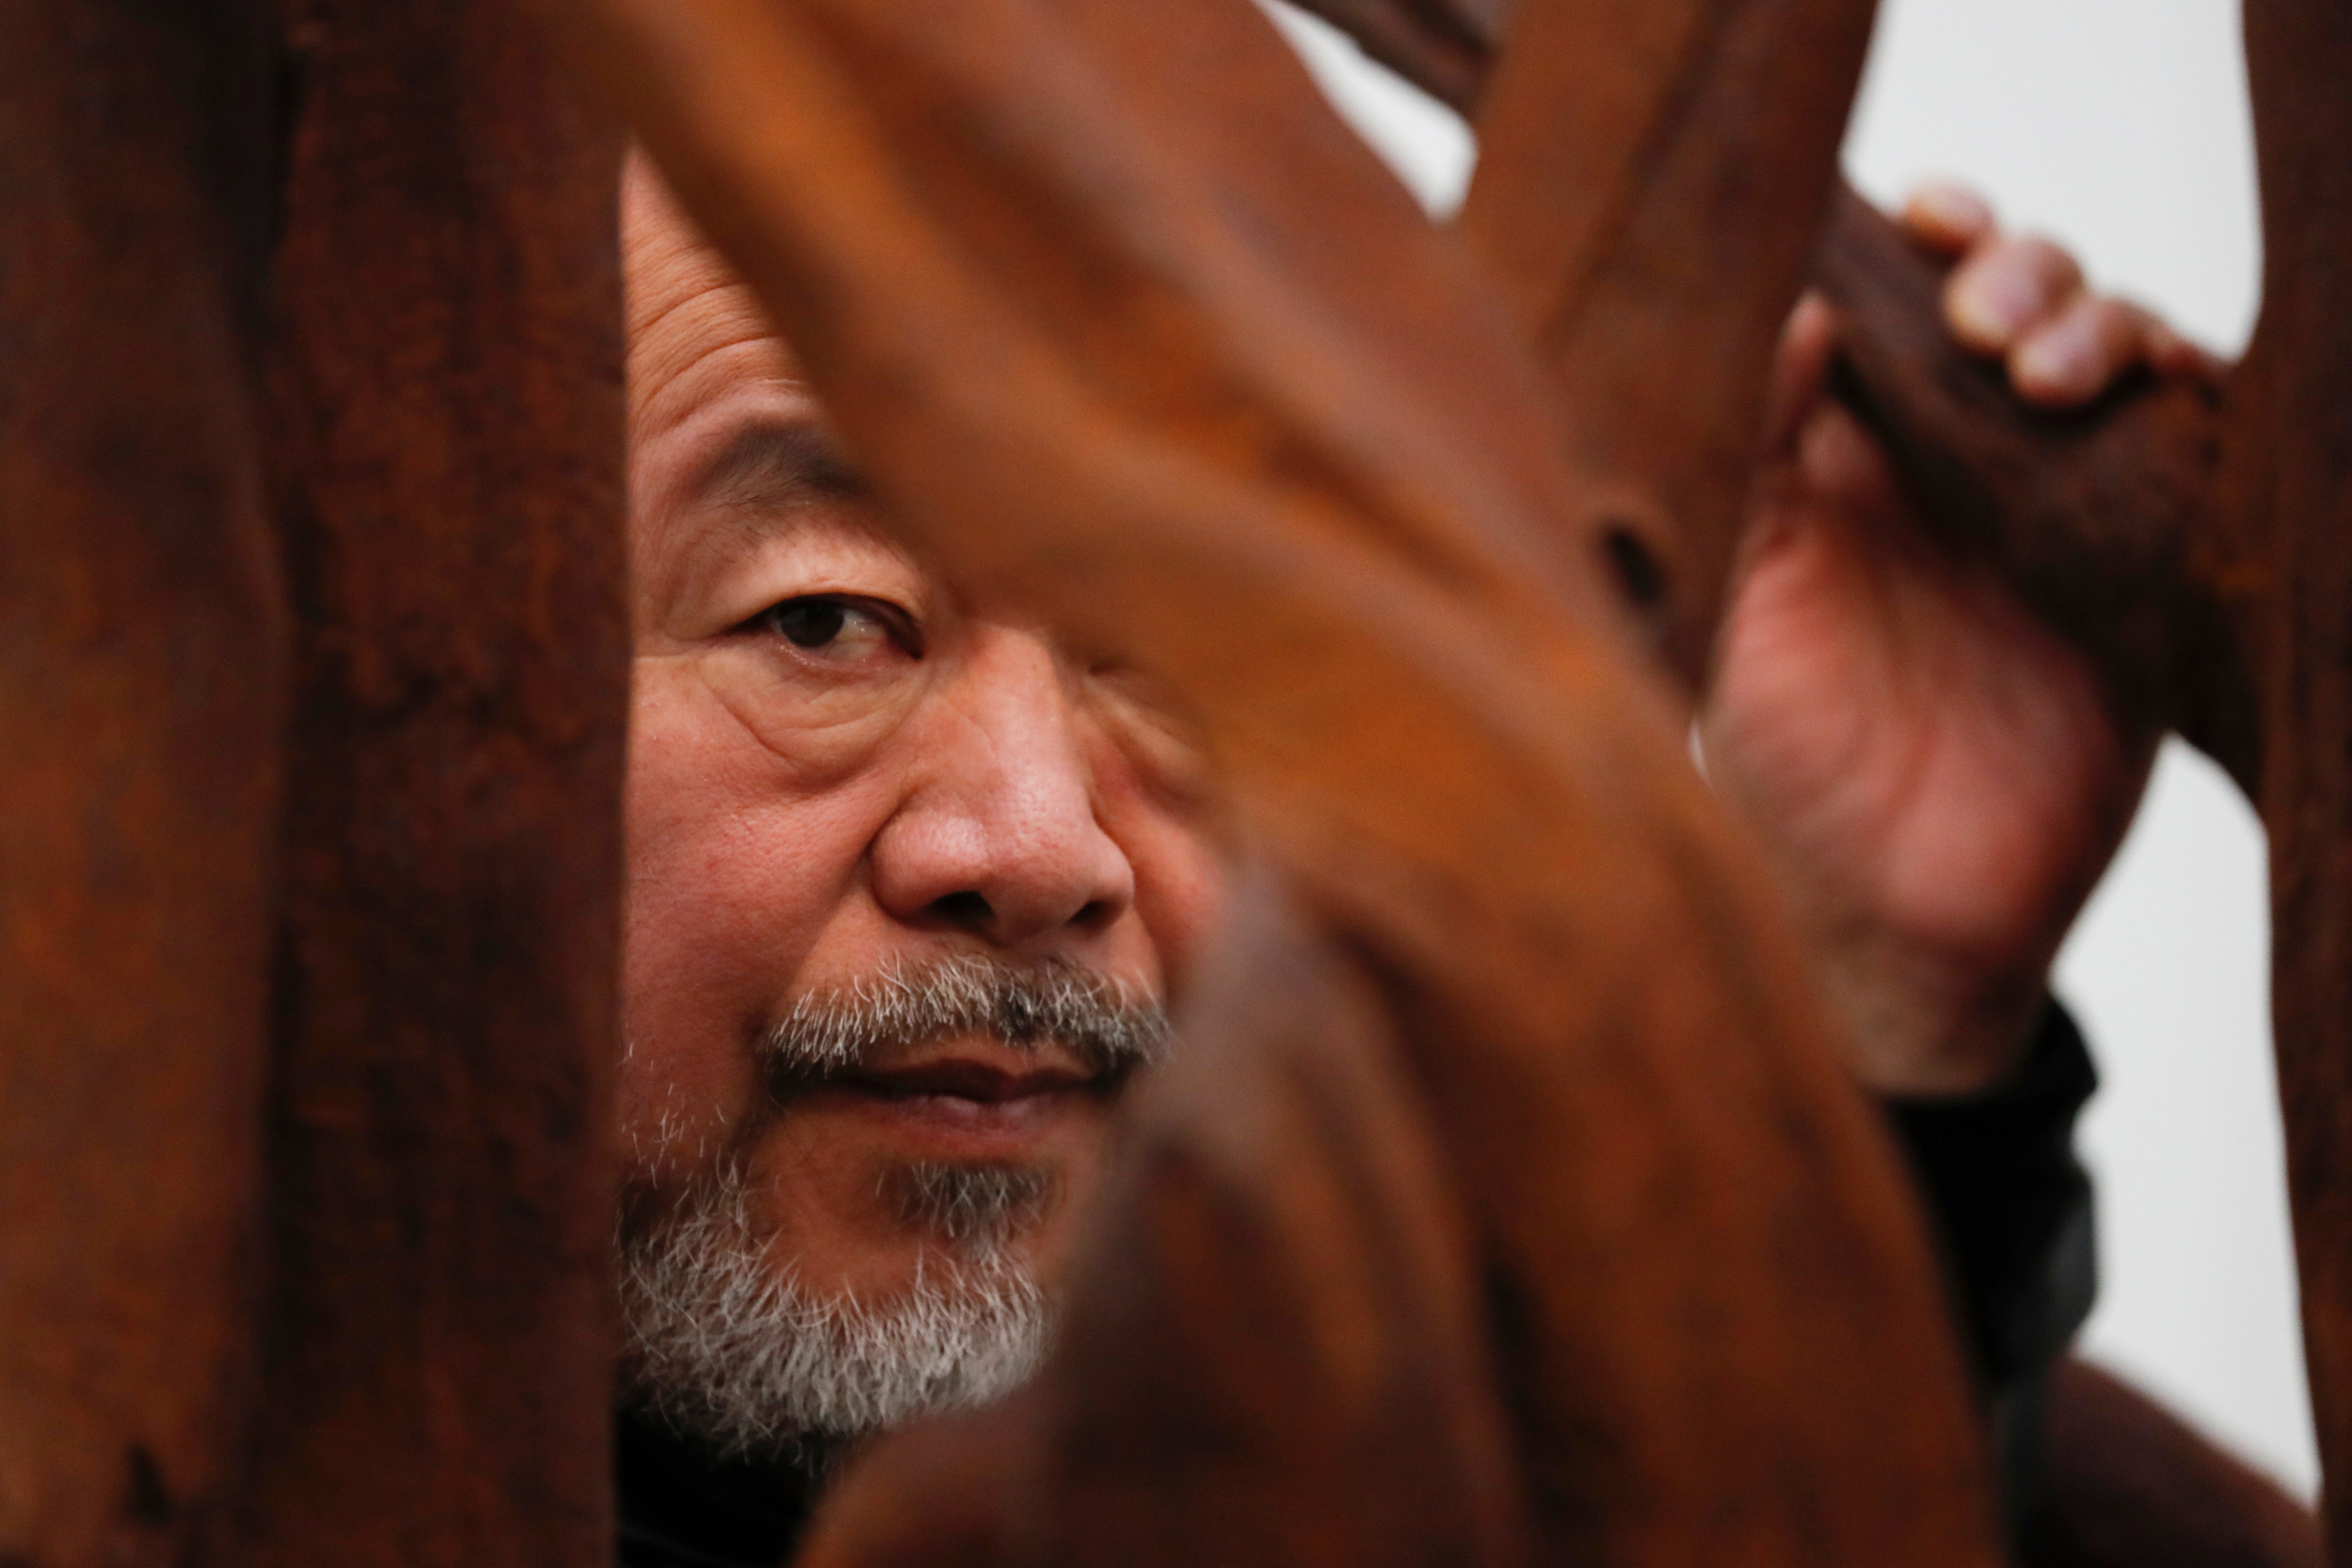 Most famous Chinese living artist Ai Weiwei